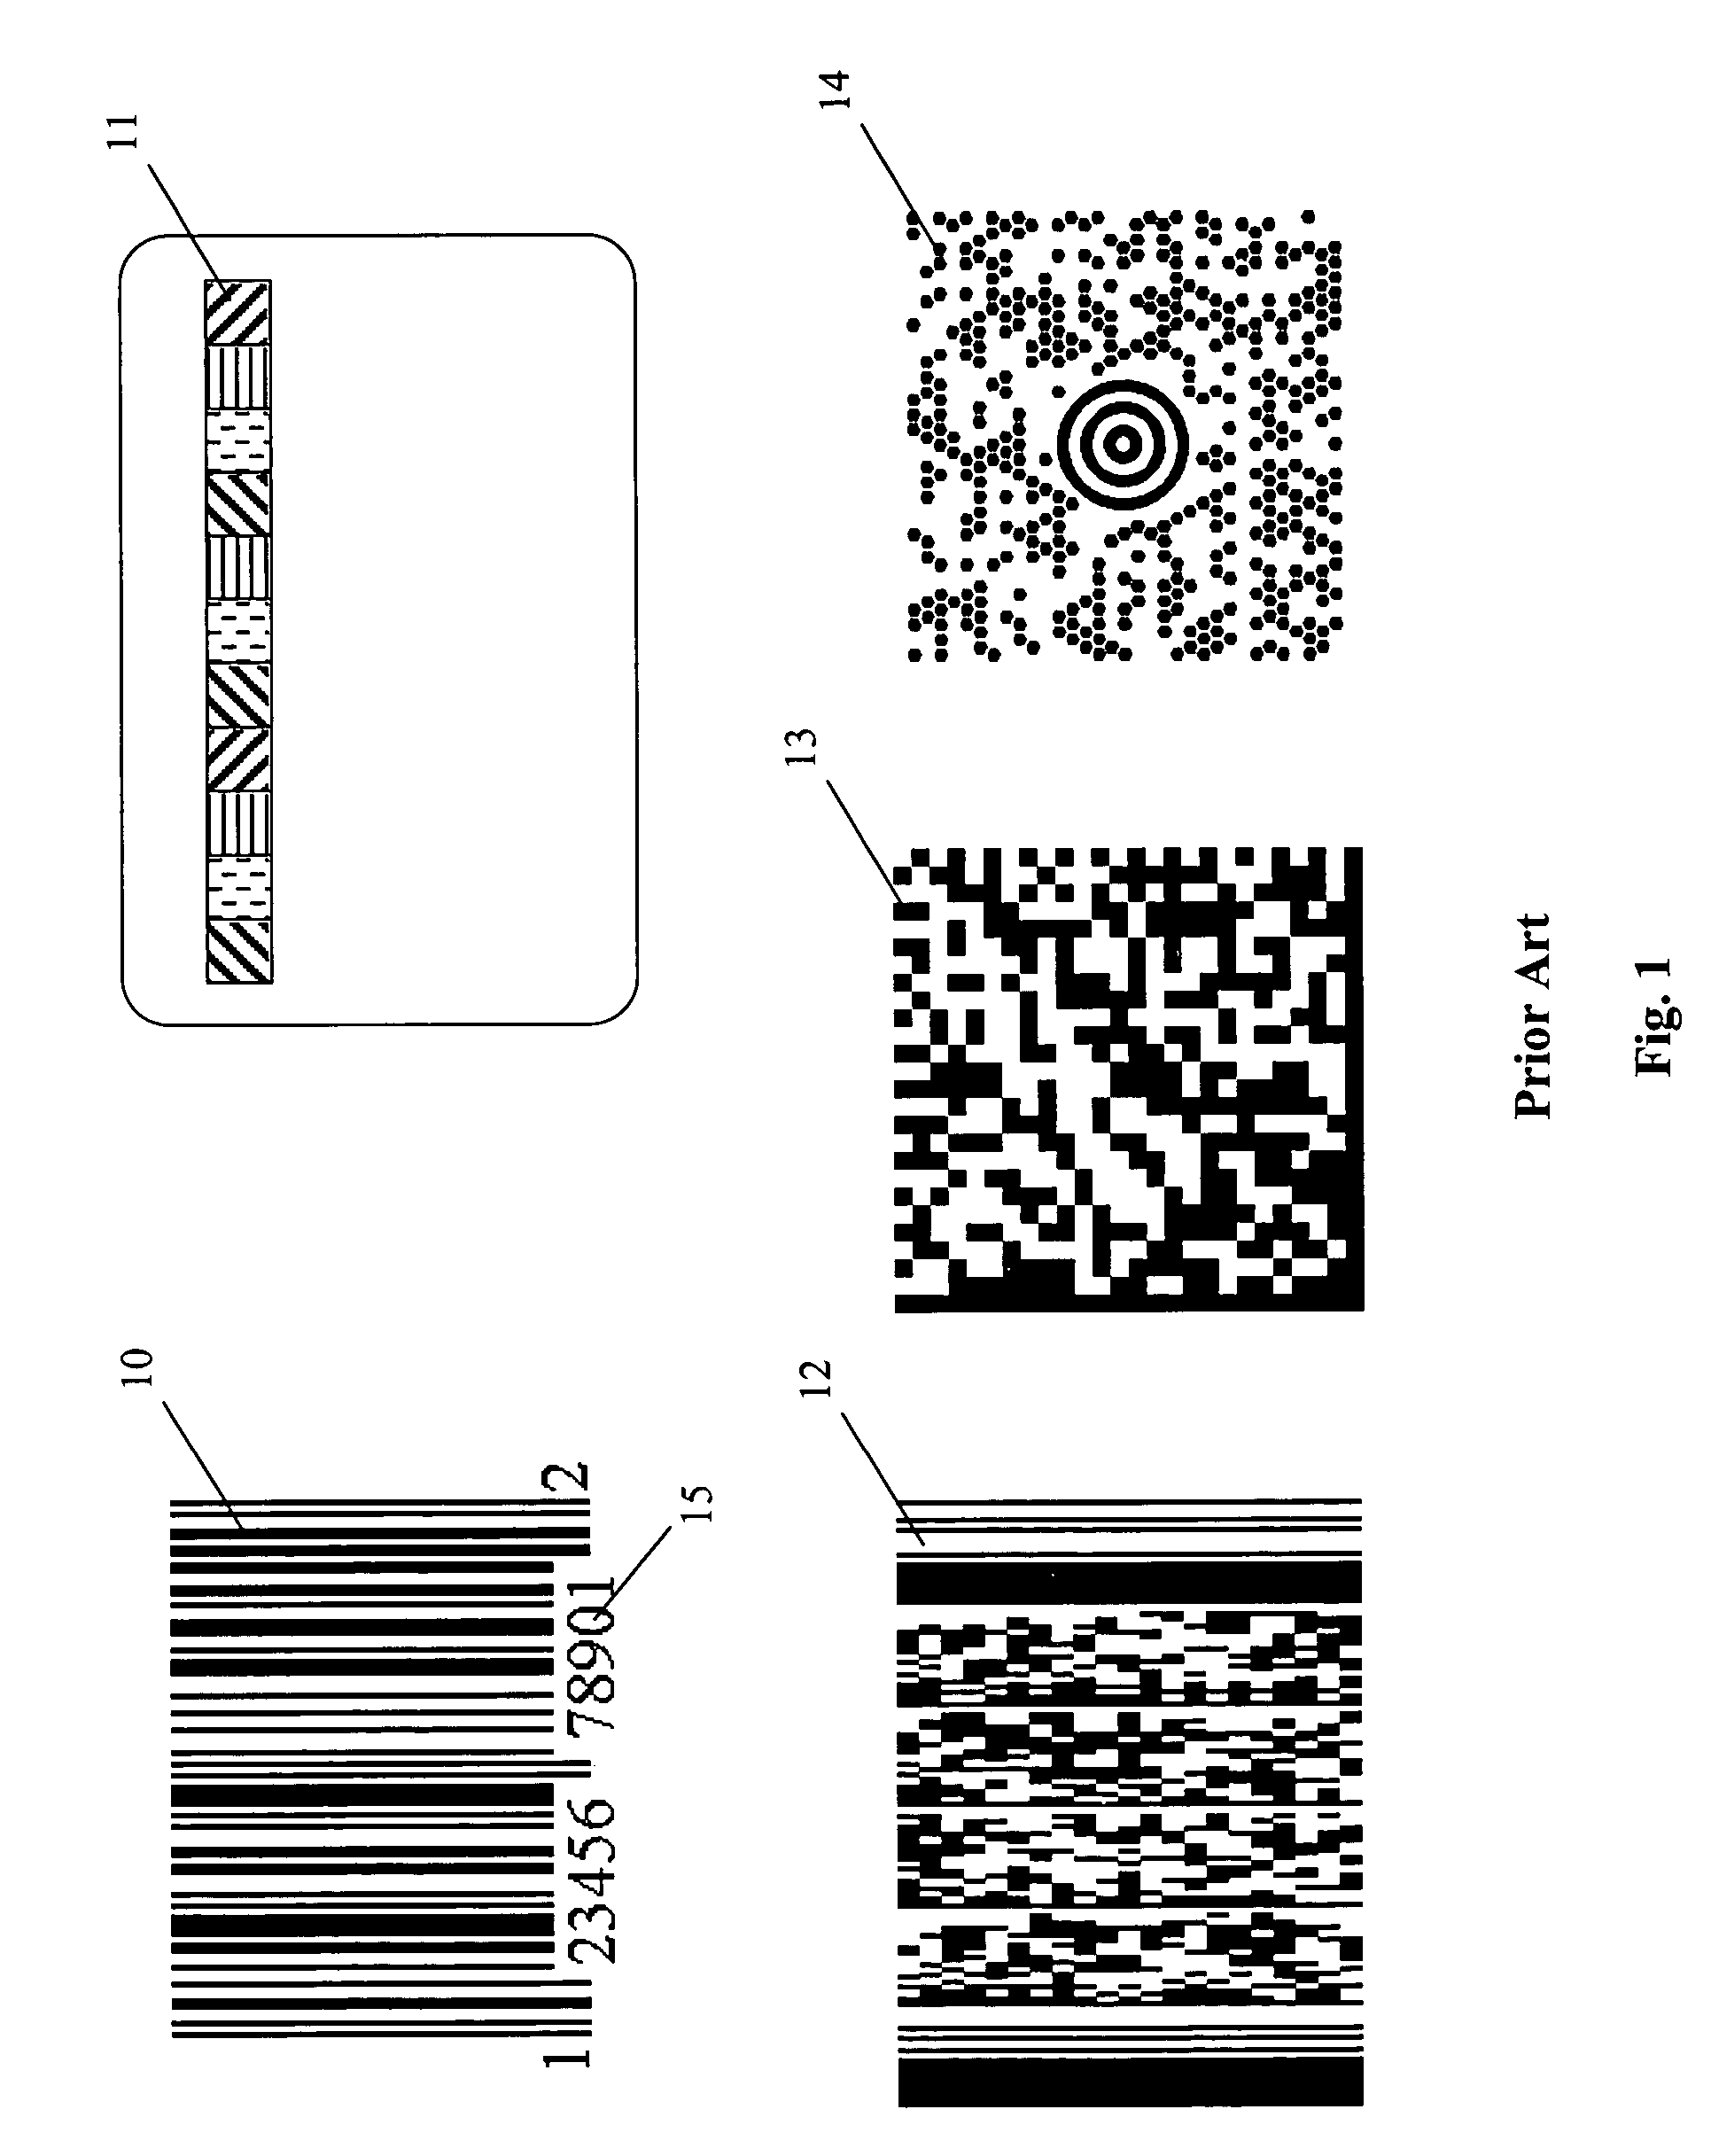 Coaligned bar codes and validation means